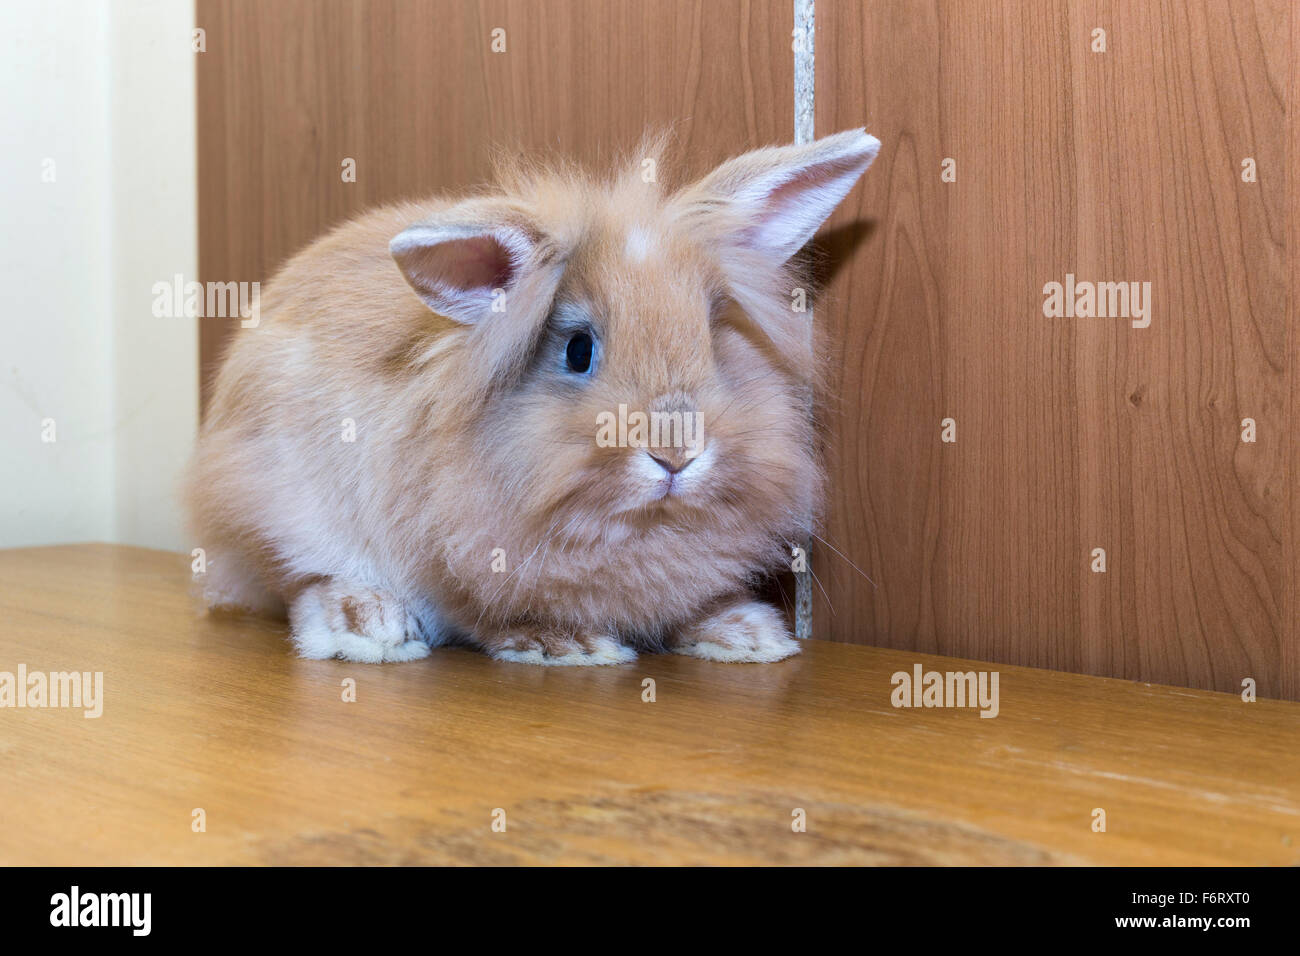 Golden rabbit turning to look at the empty space. Stock Photo